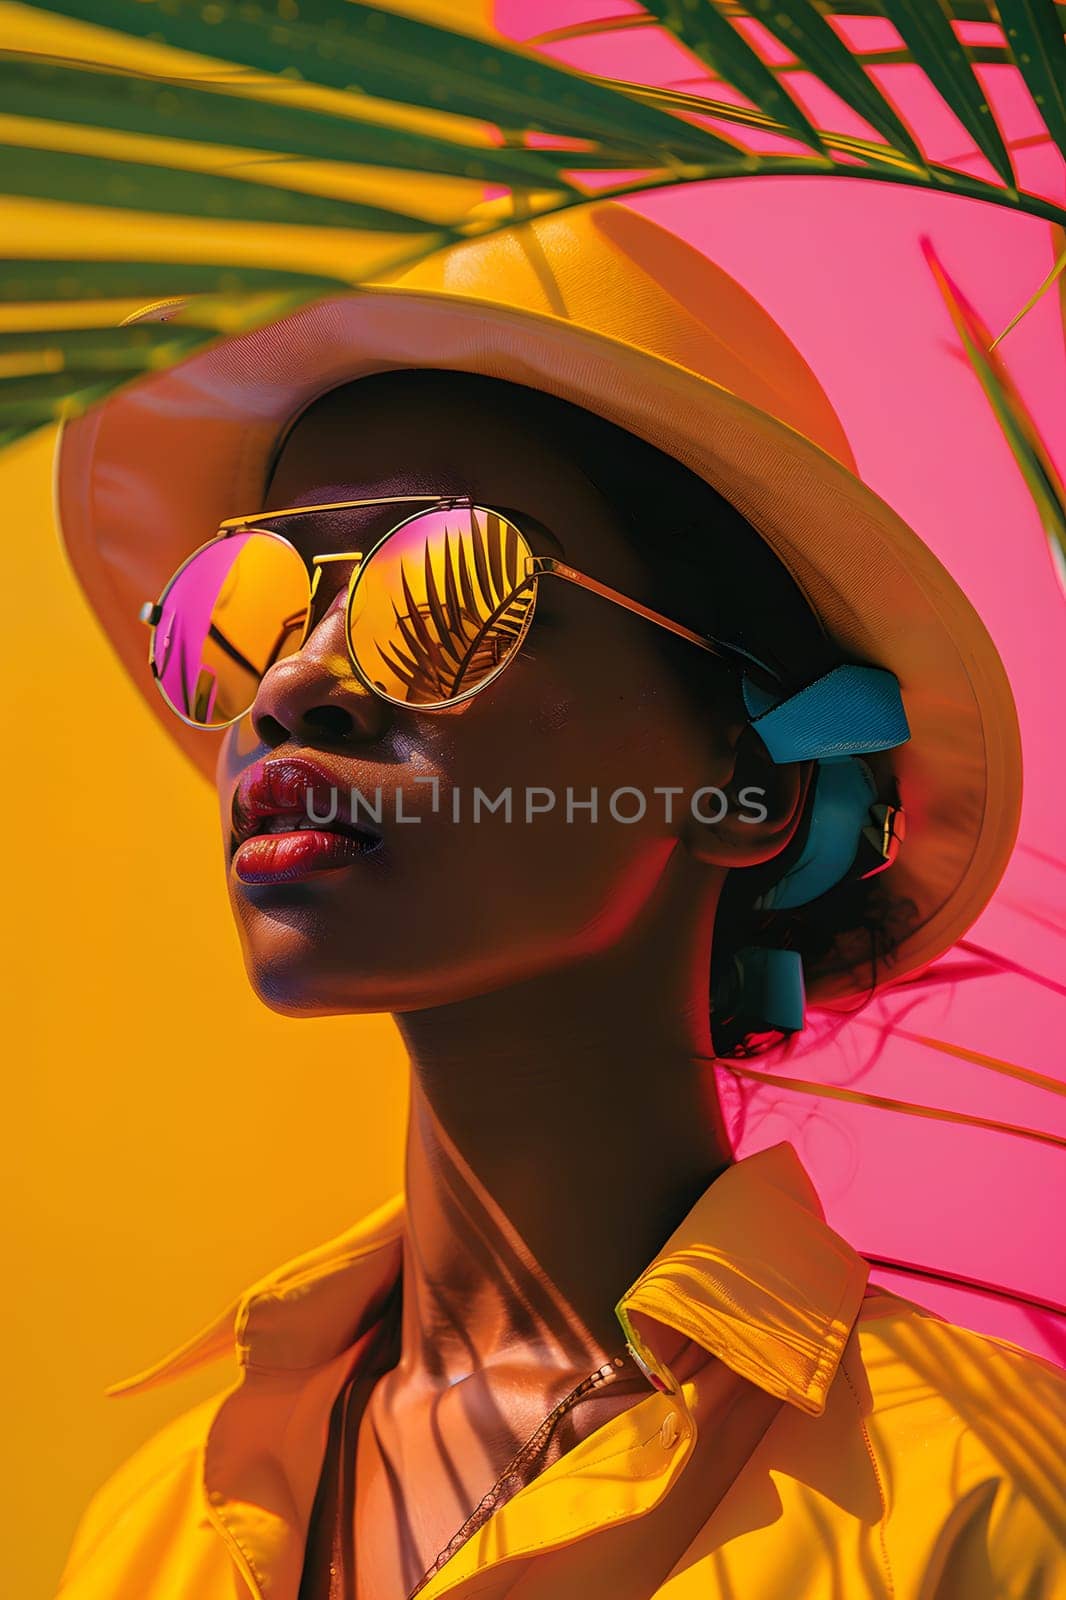 A human wearing trendy eyewear and headgear stands before a vibrant orange and magenta backdrop, embodying a fusion of art, fashion design, and entertainment